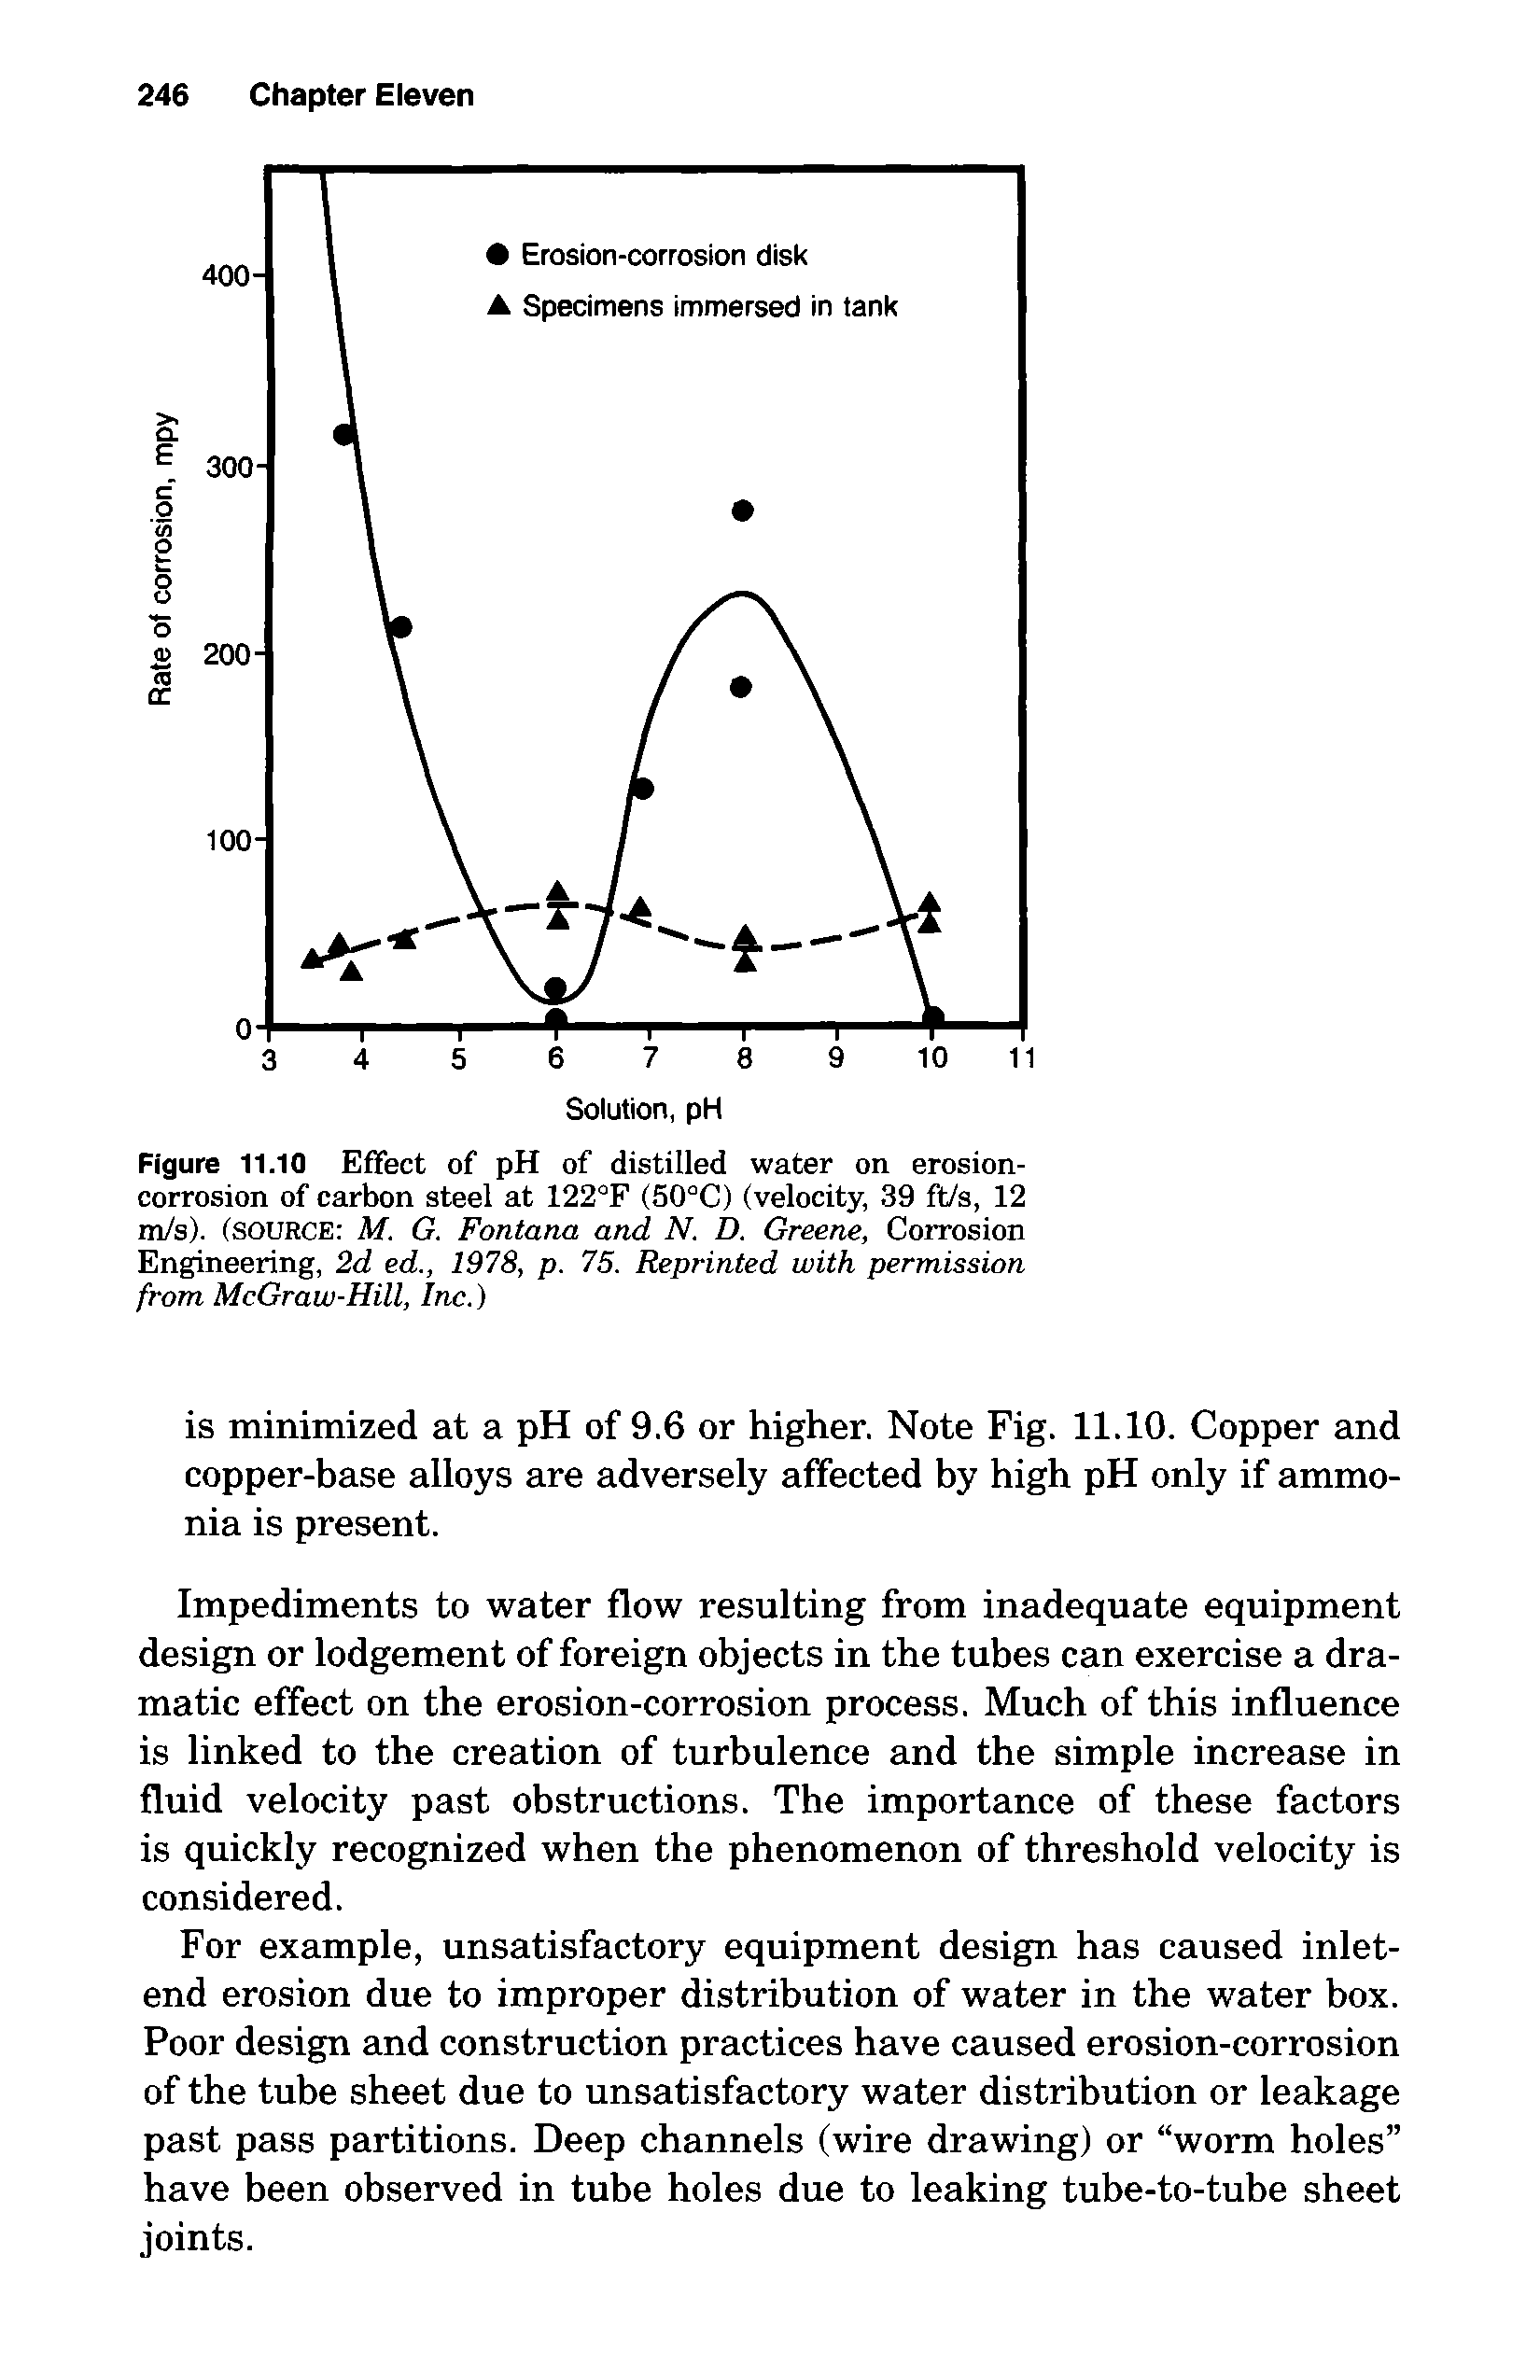 Figure 11.10 Effect of pH of distilled water on erosion-corrosion of carbon steel at 122°F (50°C) (velocity, 39 ft/s, 12 m/s). (SOURCE M. G. Fontana and N. D. Greene, Corrosion Engineering, 2d ed., 1978, p. 75. Reprinted with permission from McGraw-Hill, Inc.)...